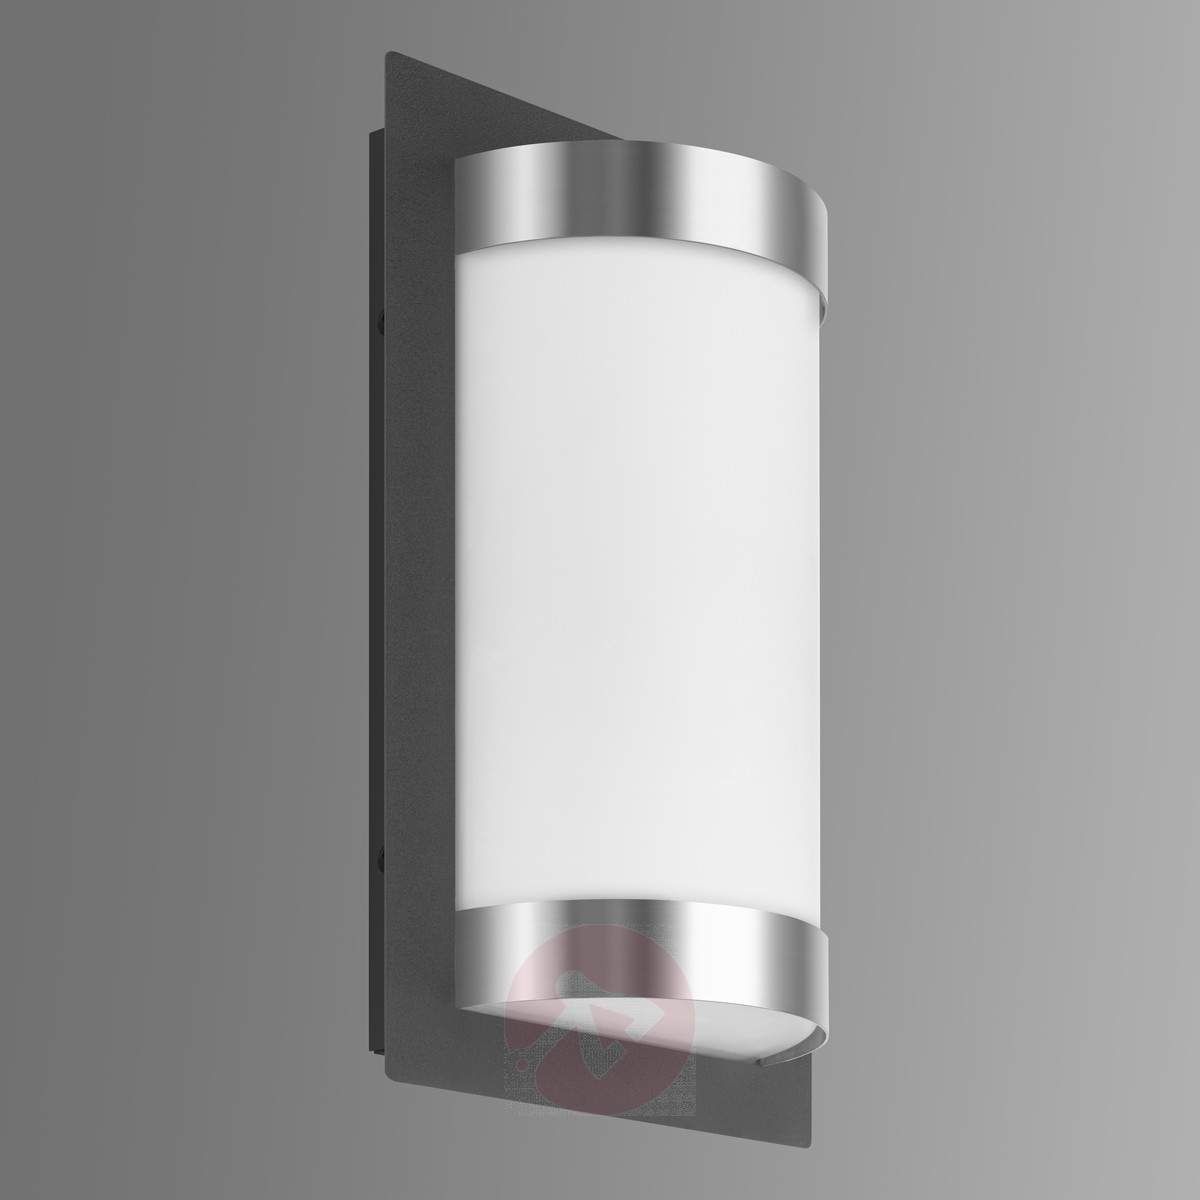 High Quality Apollo Outdoor Wall Light | Lights.co.uk Within Quality Outdoor Wall Lighting (Photo 4 of 15)